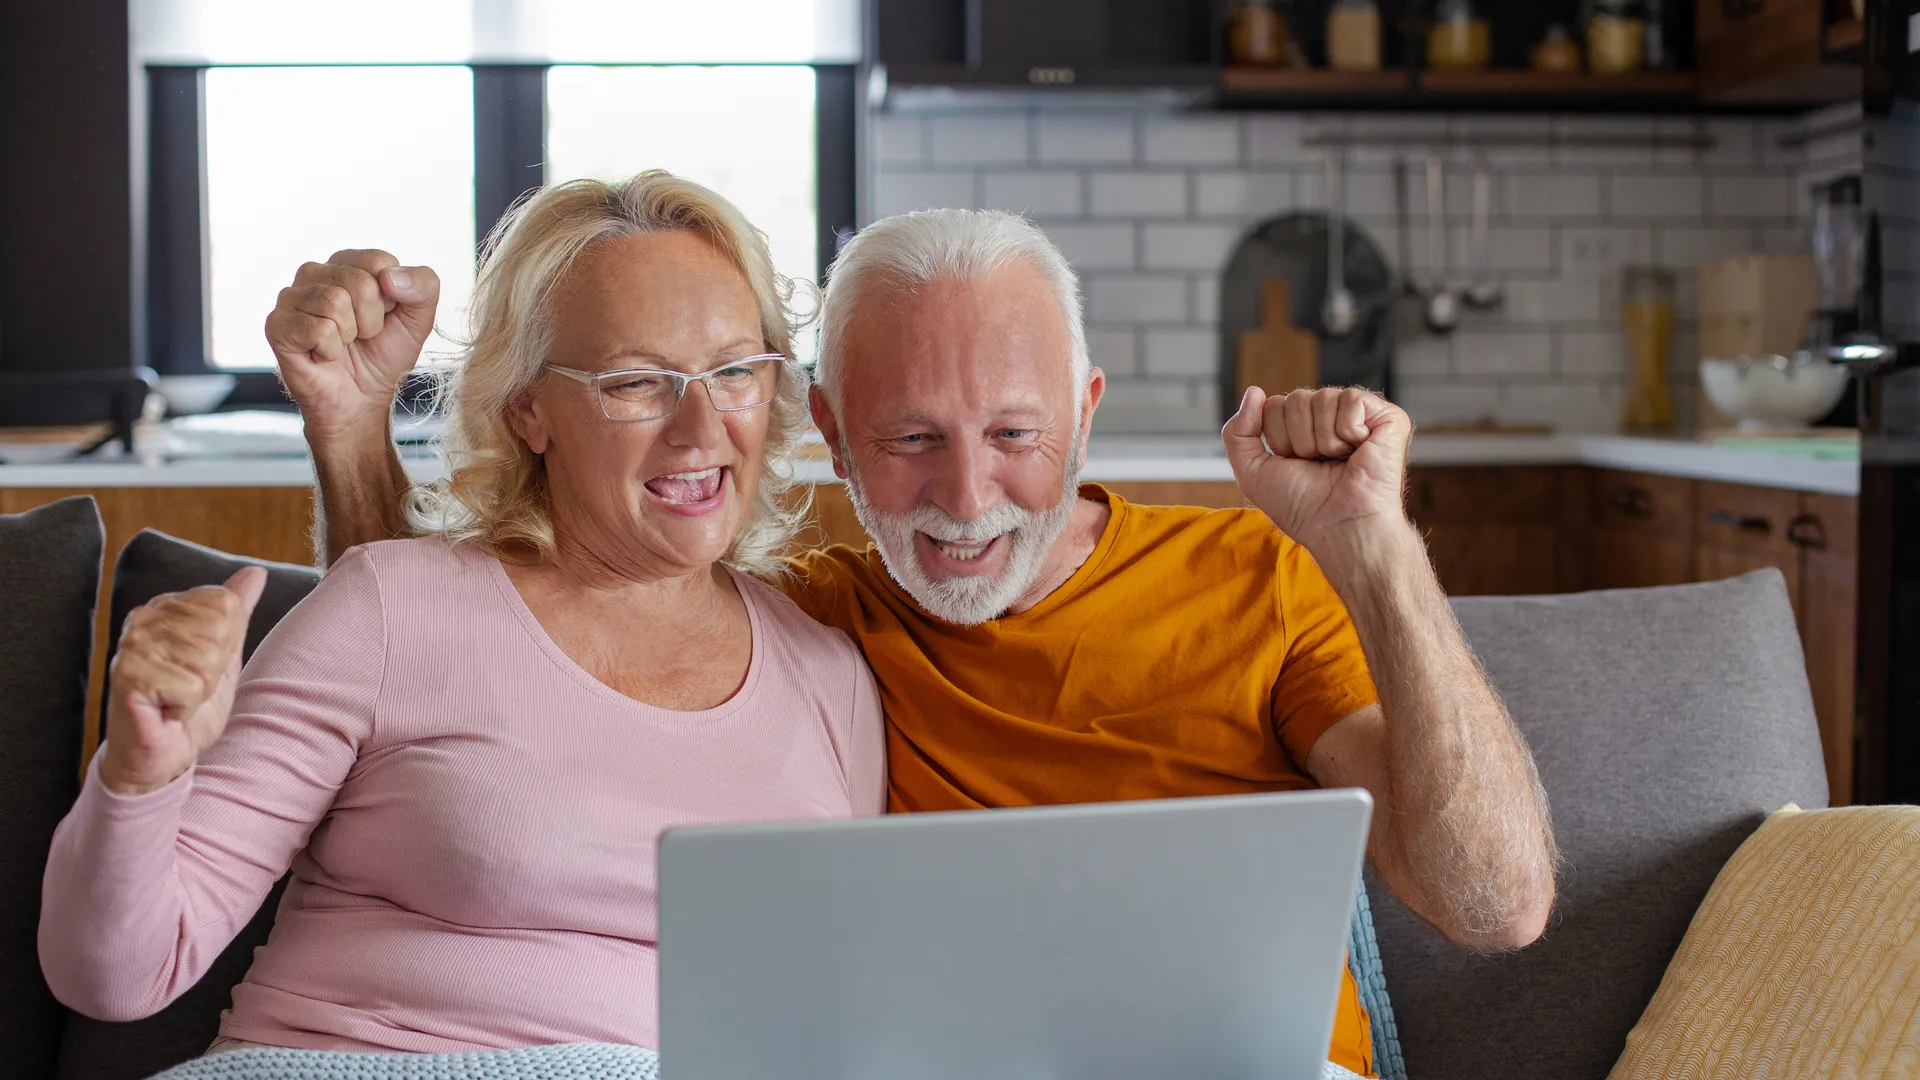 A happy retired couple looks at their laptop and raise their hands.